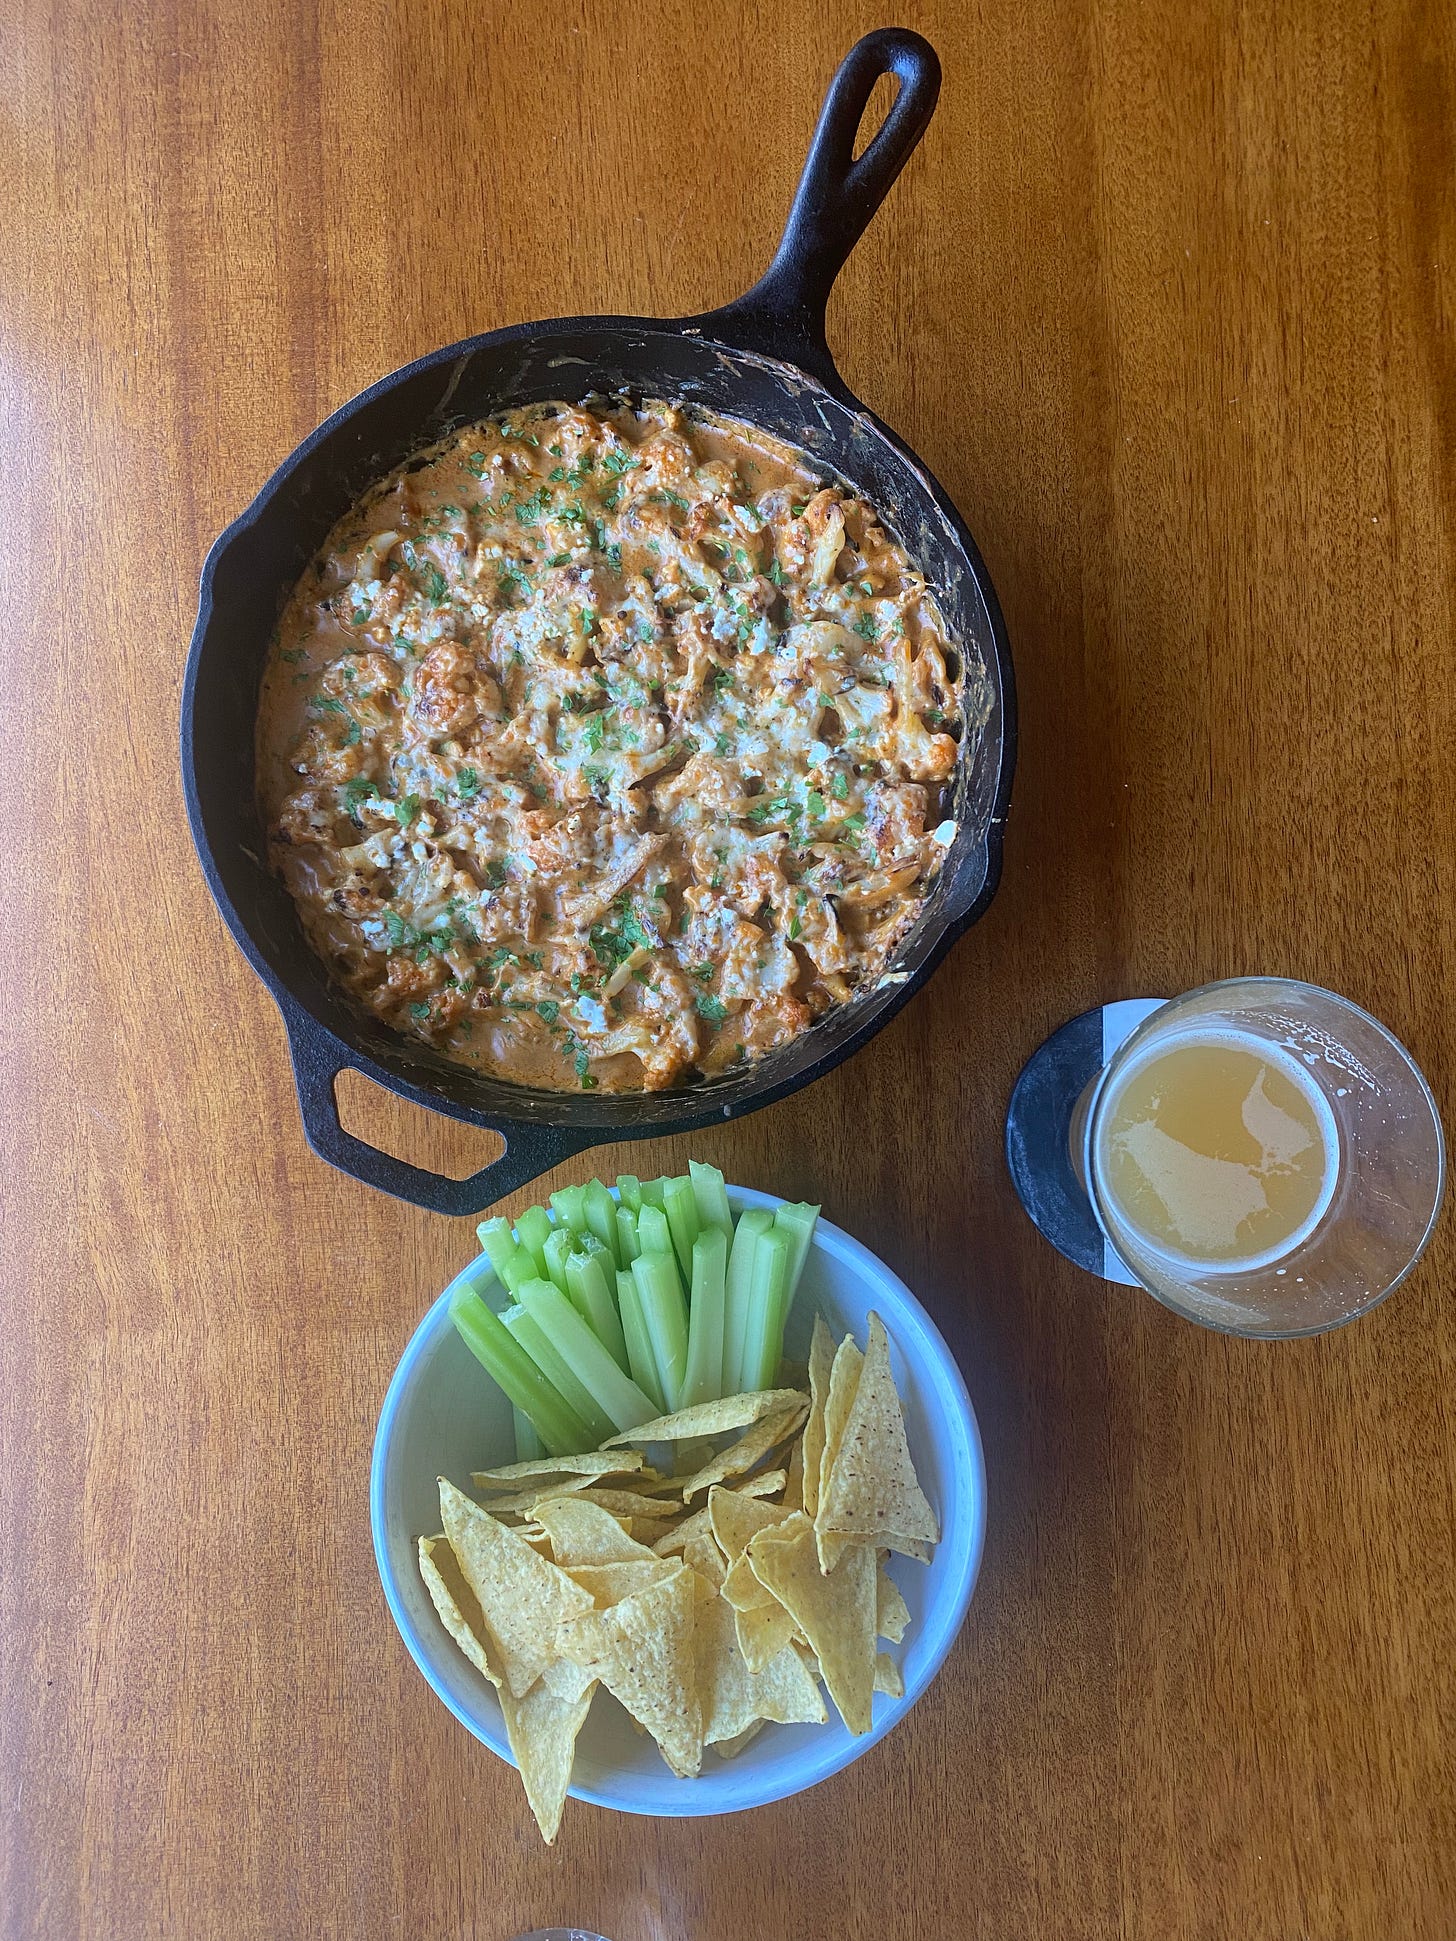 From above, a white bowl of yellow tortilla chips on one side and celery sticks on the other. Above the bowl is a cast-iron pan of the dip described above, creamy orange with cheese and parsley on top. A glass of beer sits on a coaster to the right.